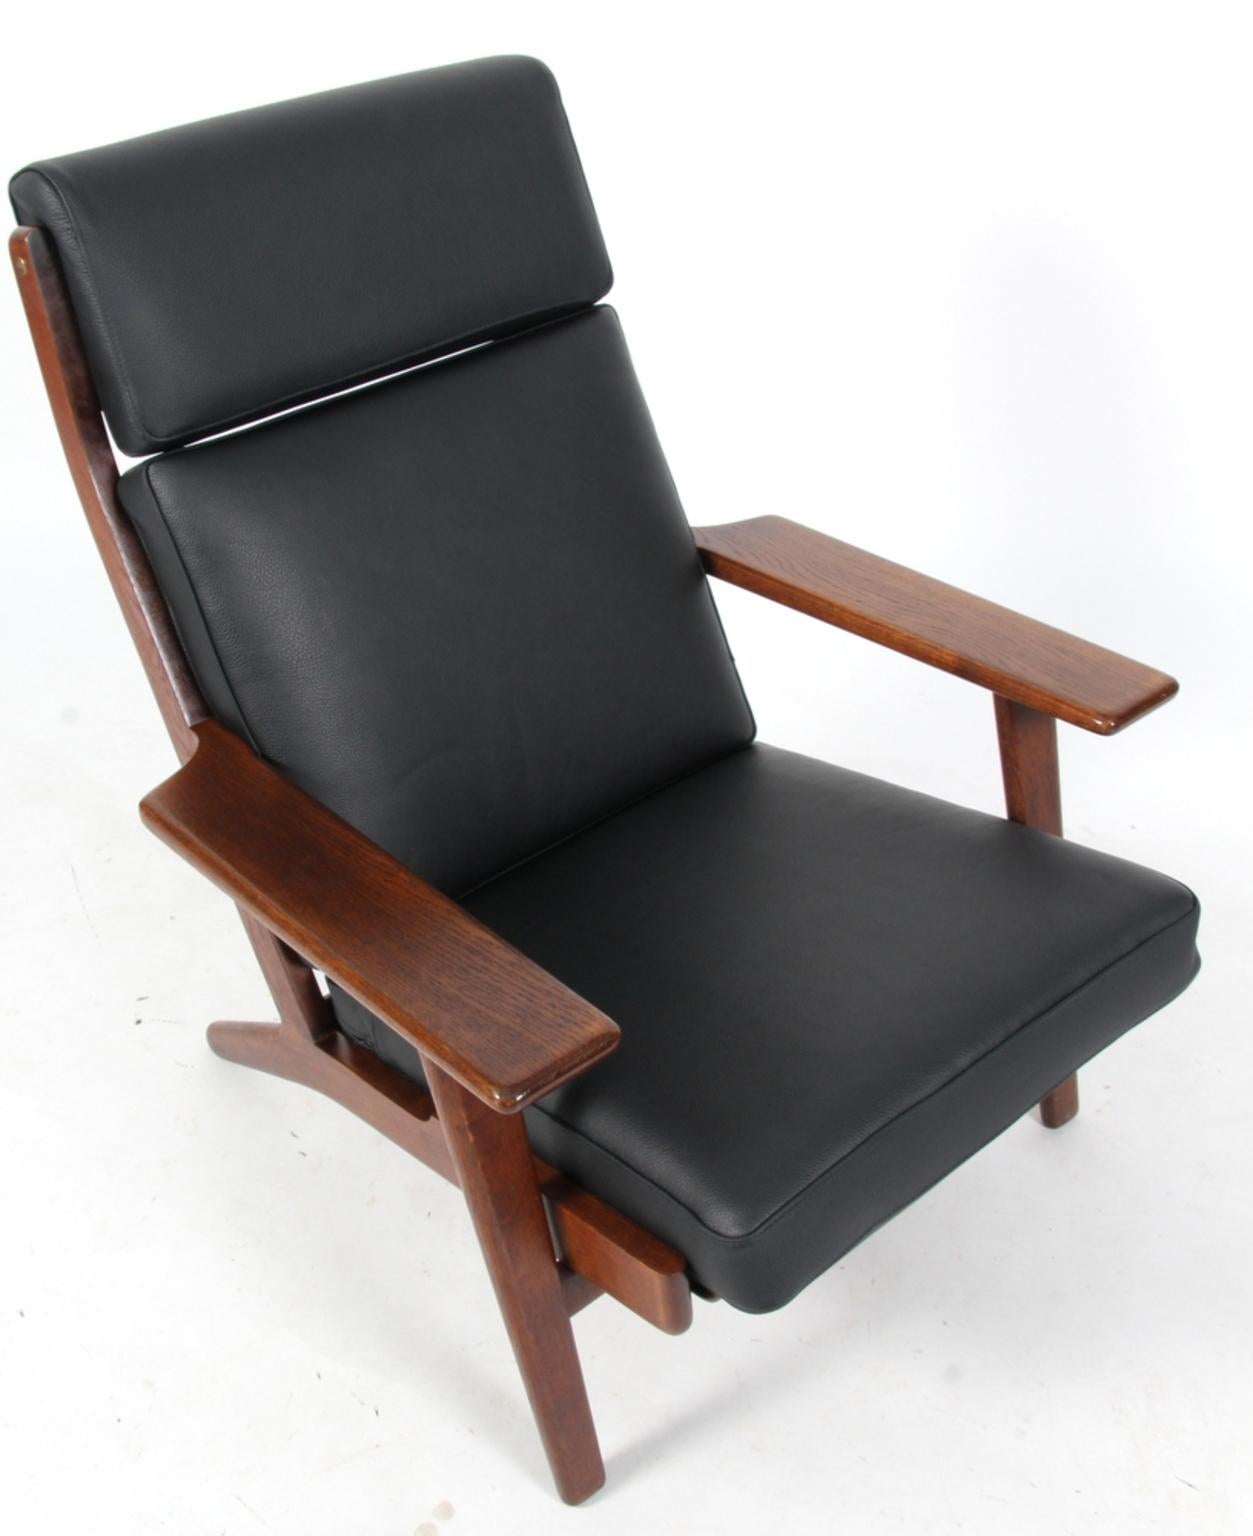 Hans J. Wegner lounge chair new upholstered with black leather, foam cushions.

Frame in smoked oak.

Model 290A, made by GETAMA.